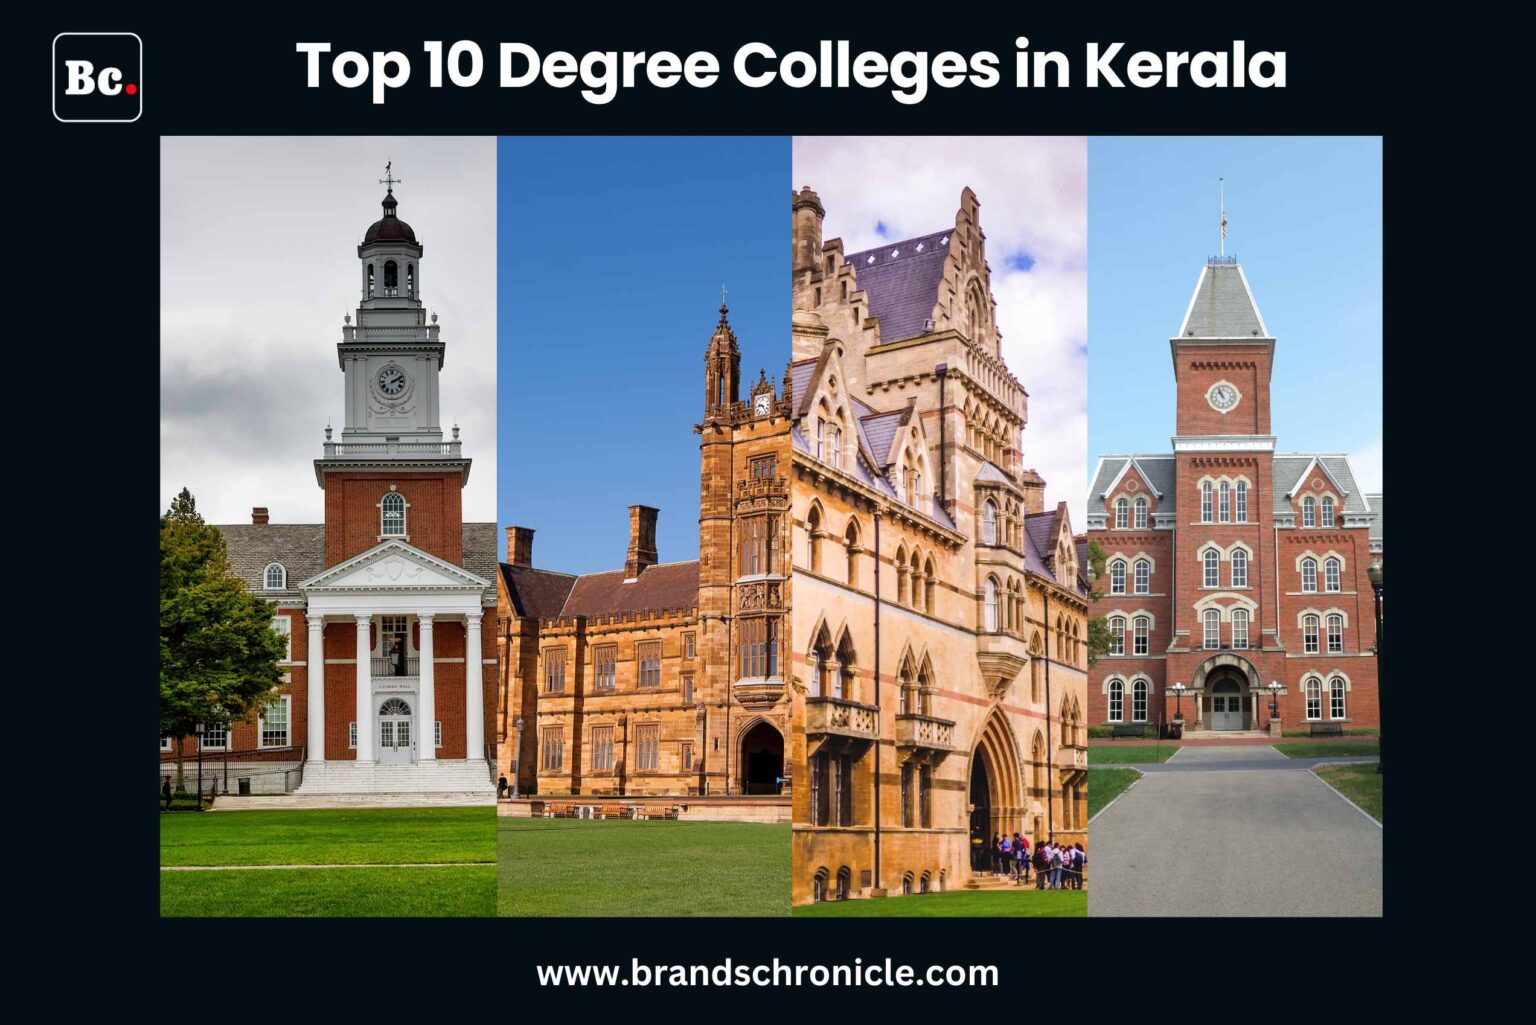 Top 10 Degree Colleges in Kerala